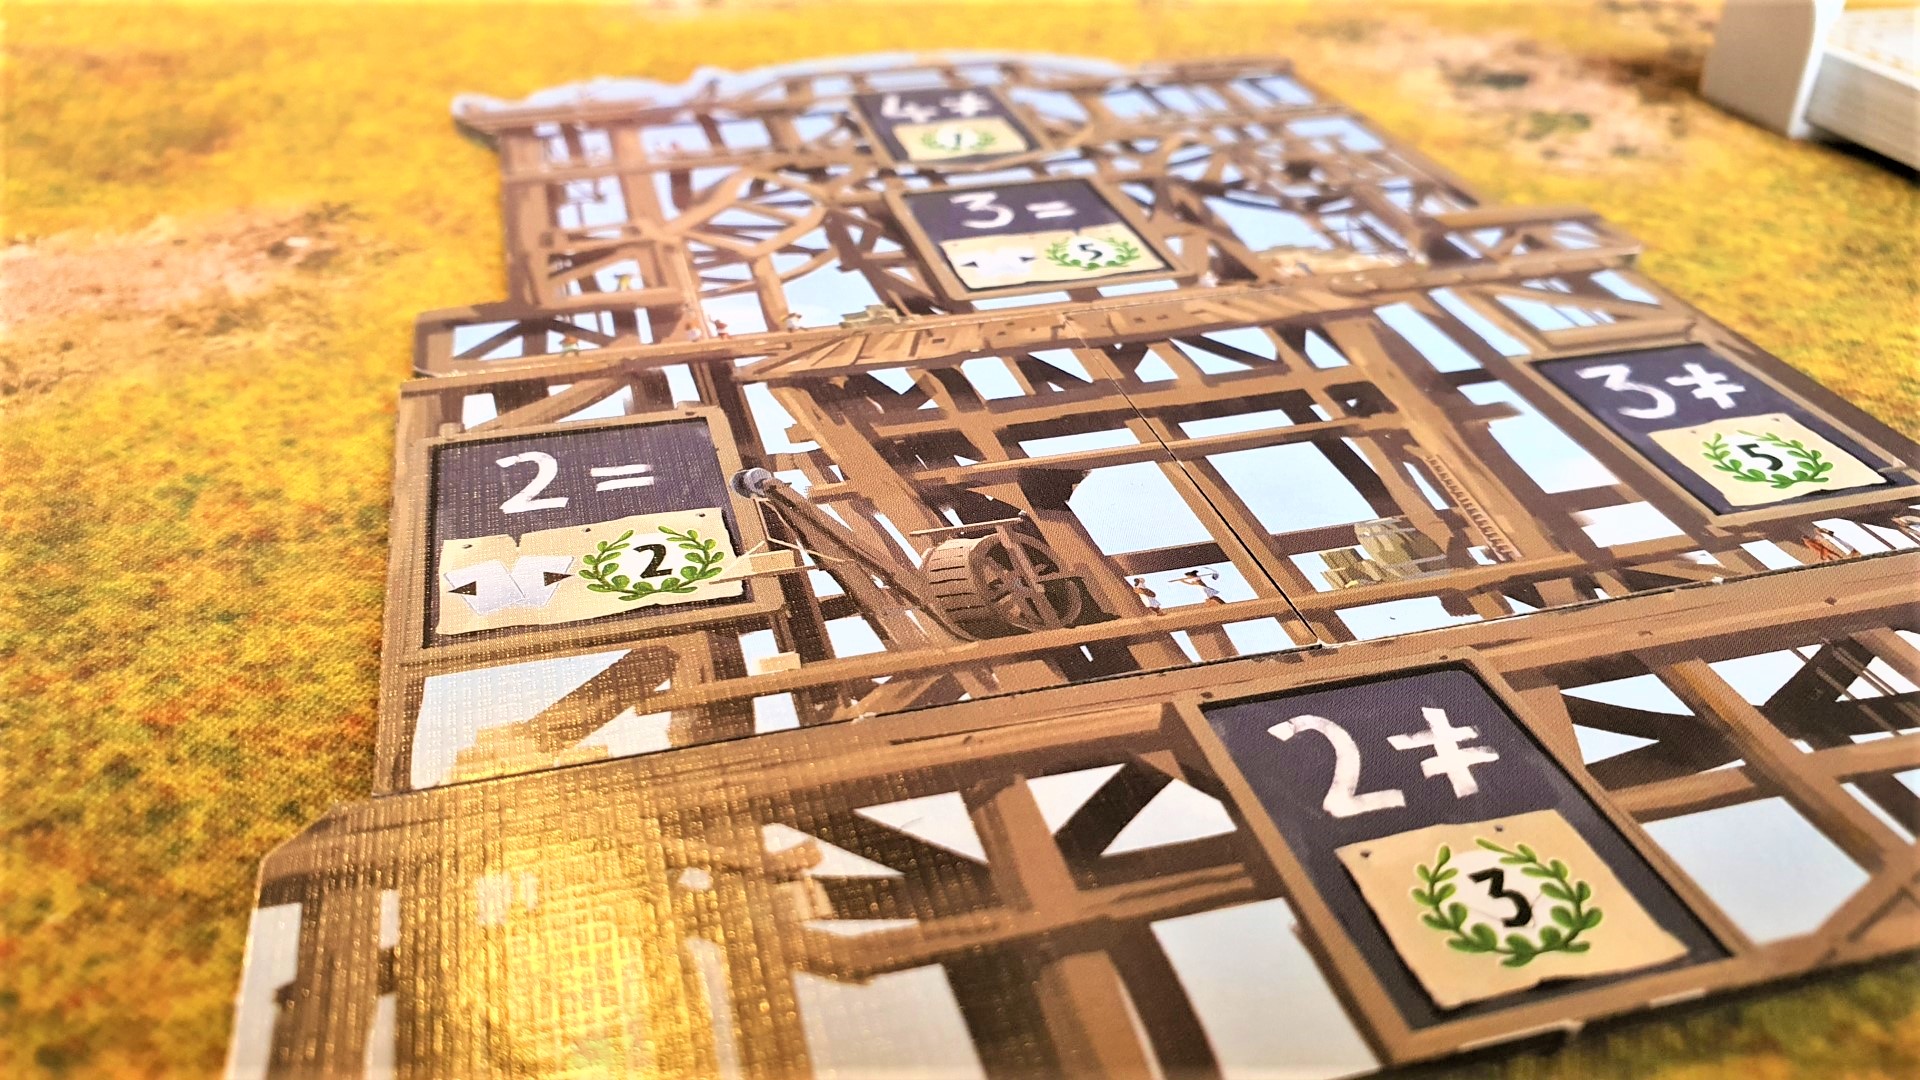 7 Wonders: Architects Expands On Accessible Board Gaming To The Masses